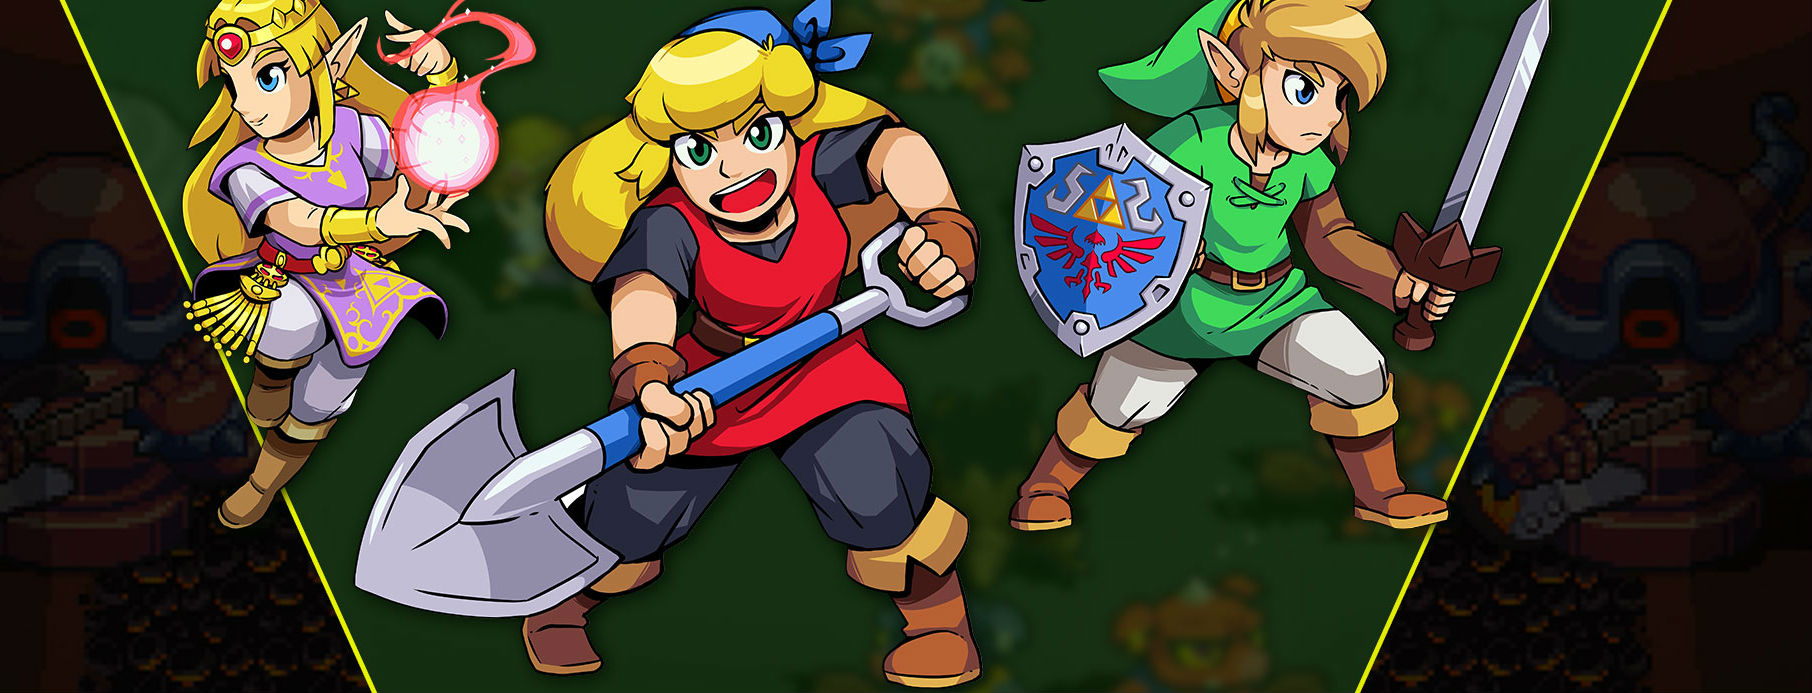 Cadence of Hyrule is a Zelda rhythm game that demands you move to